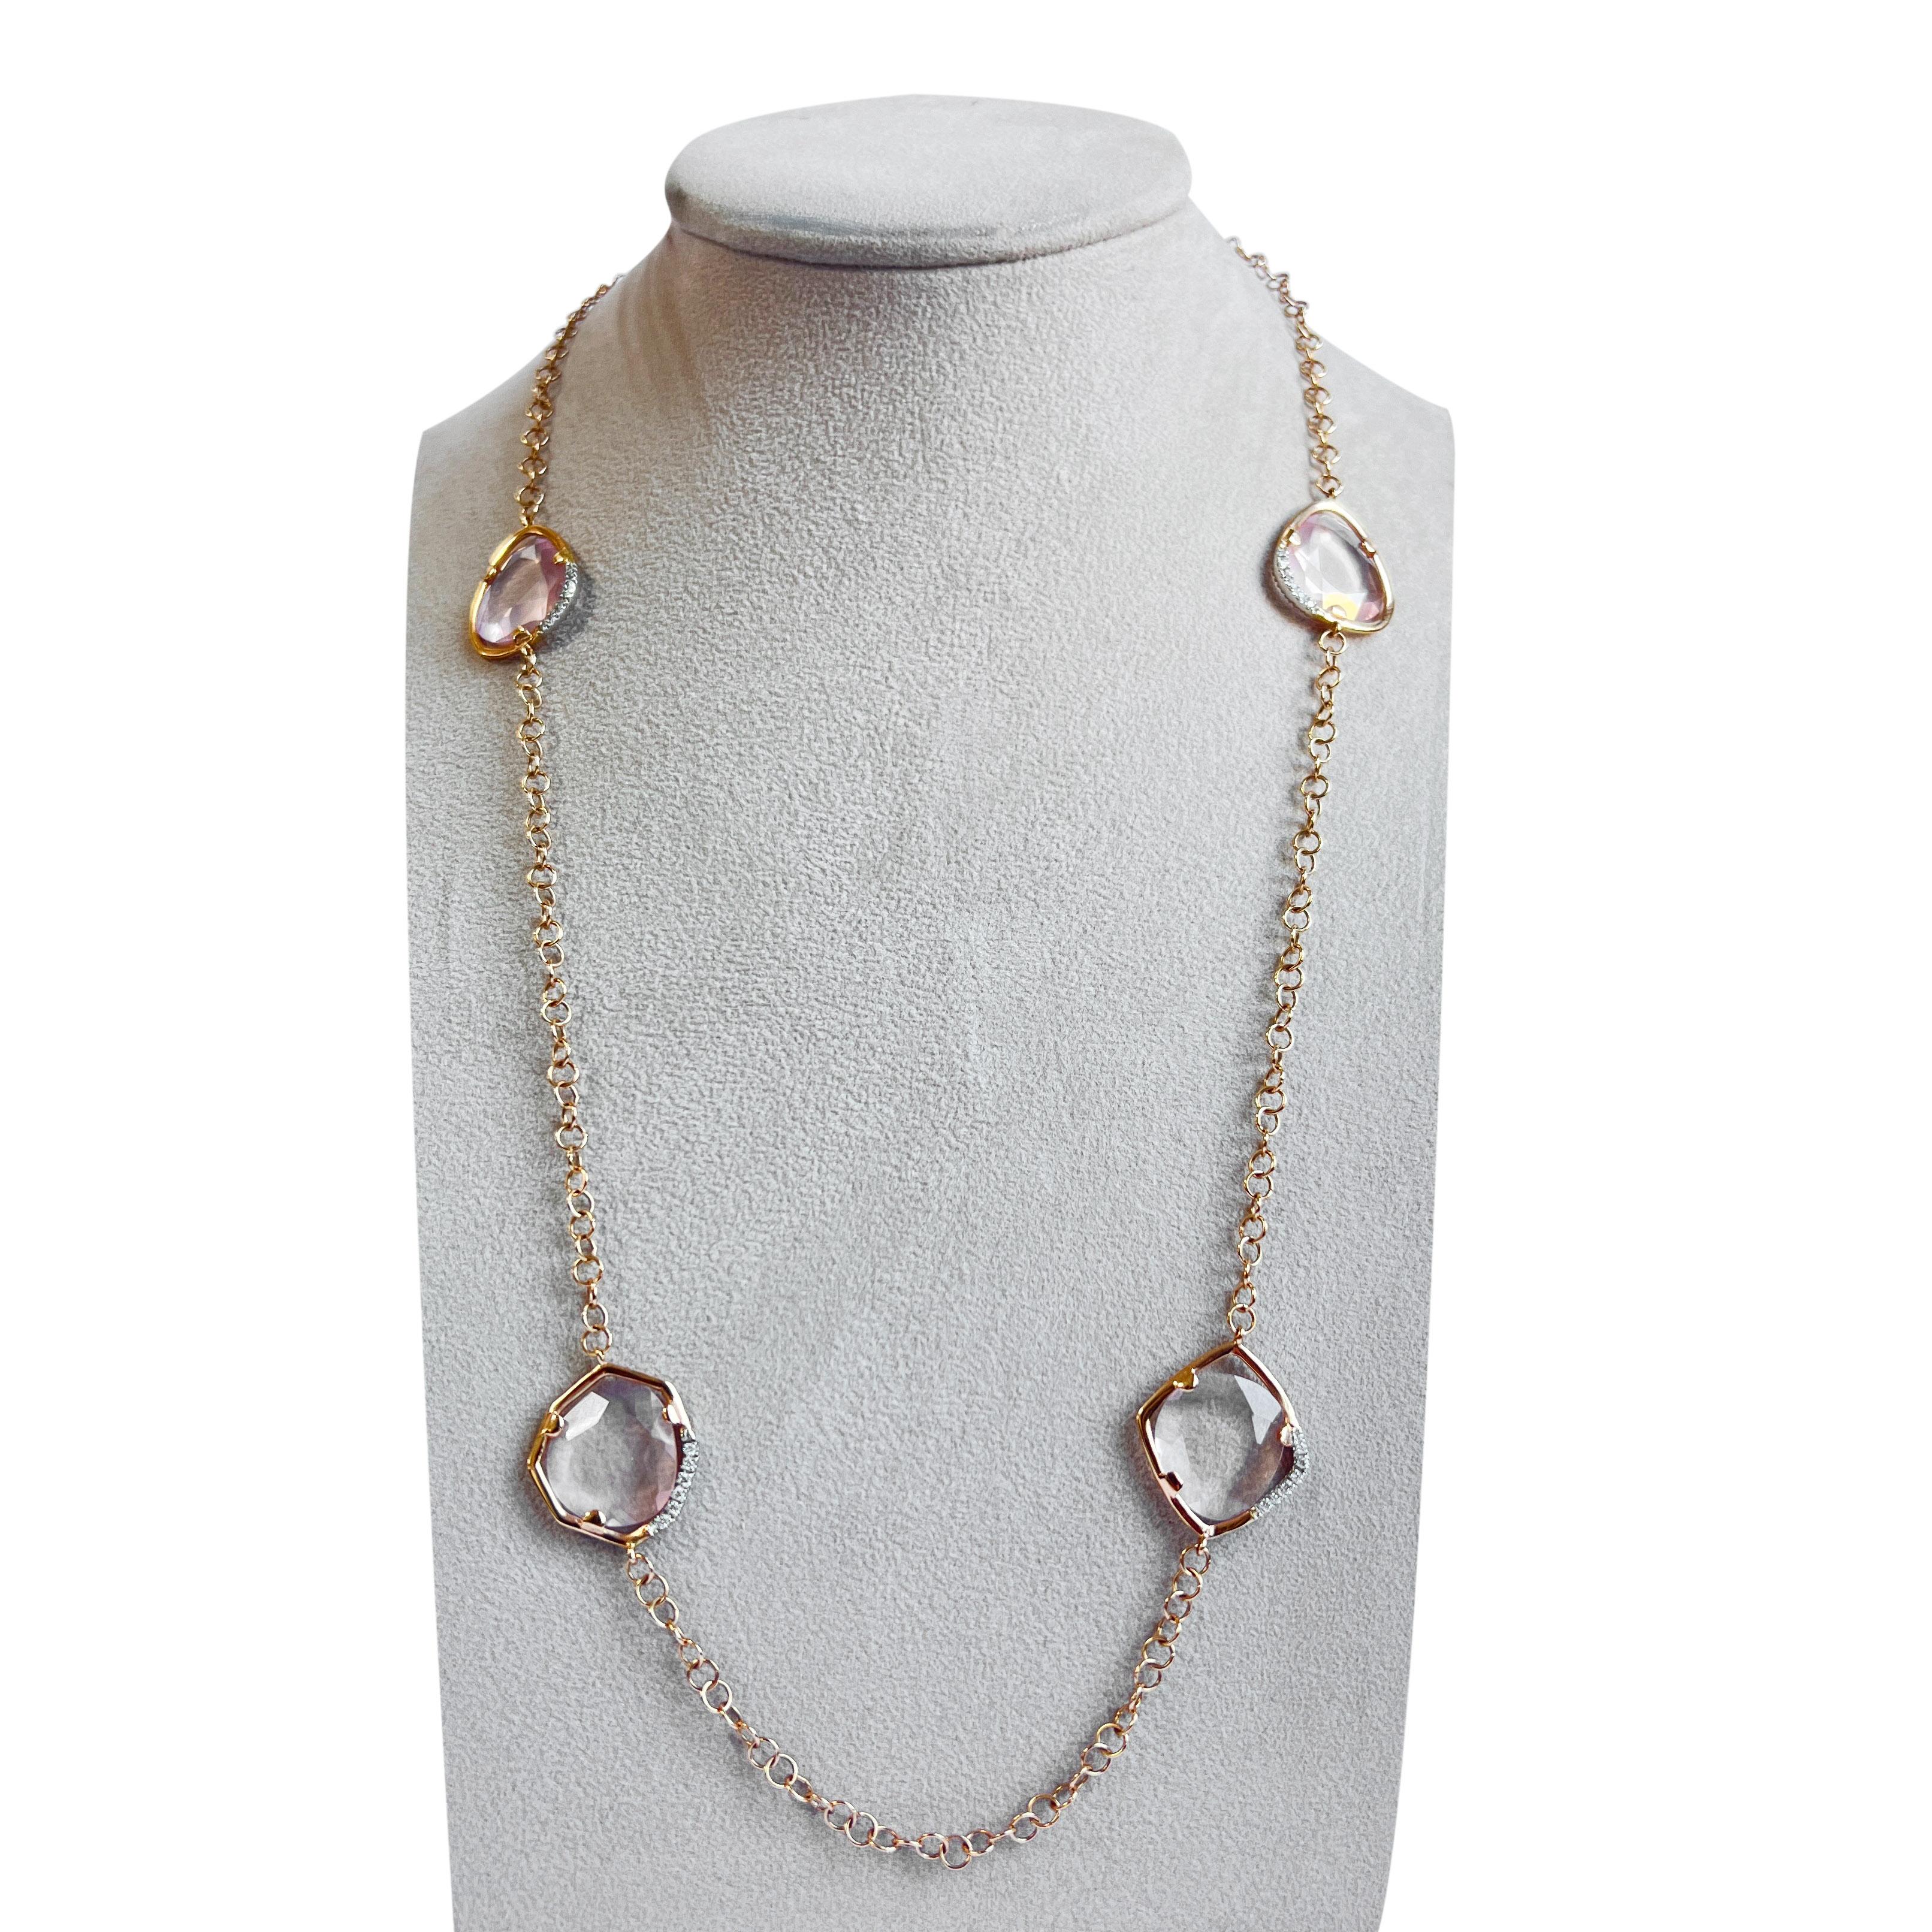 All of our jewellery is made by Italian Artisans to guarantee the Made In Italy manufacturing. 
This 18kt Pink Gold Necklace chain with Pink Quartz gems is a beautiful and elegant piece of jewelry. Pink gold  has a warm and romantic hue that